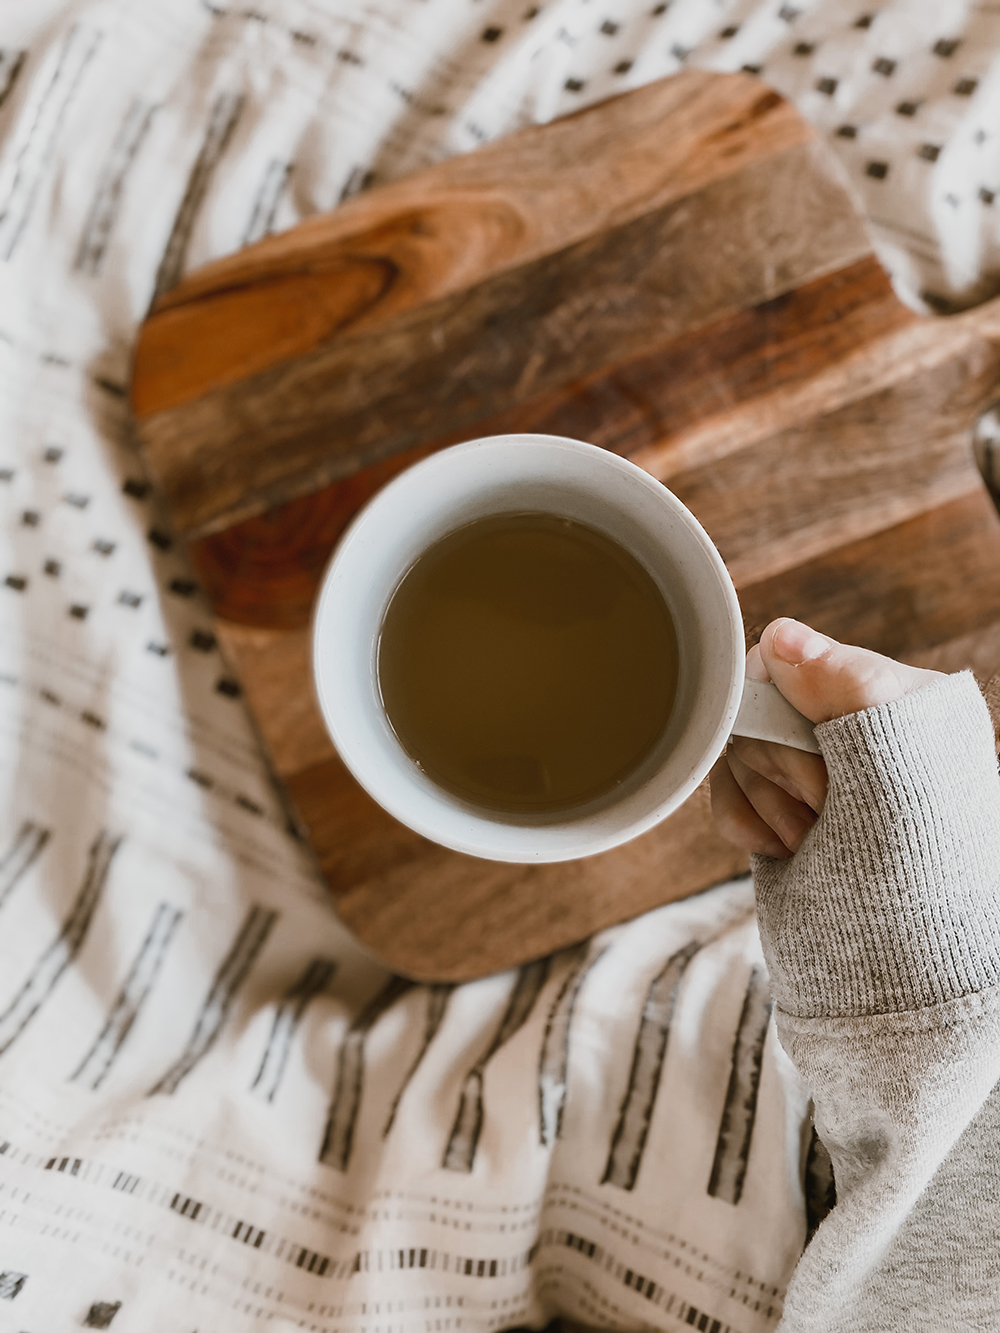 I'm sharing my favorite wellness tea recipe to make when I am feeling under the weather or down with something. It has totally helped in these instances. Thieves tea for under-the-weather days is on the KaraLayne.com for you!